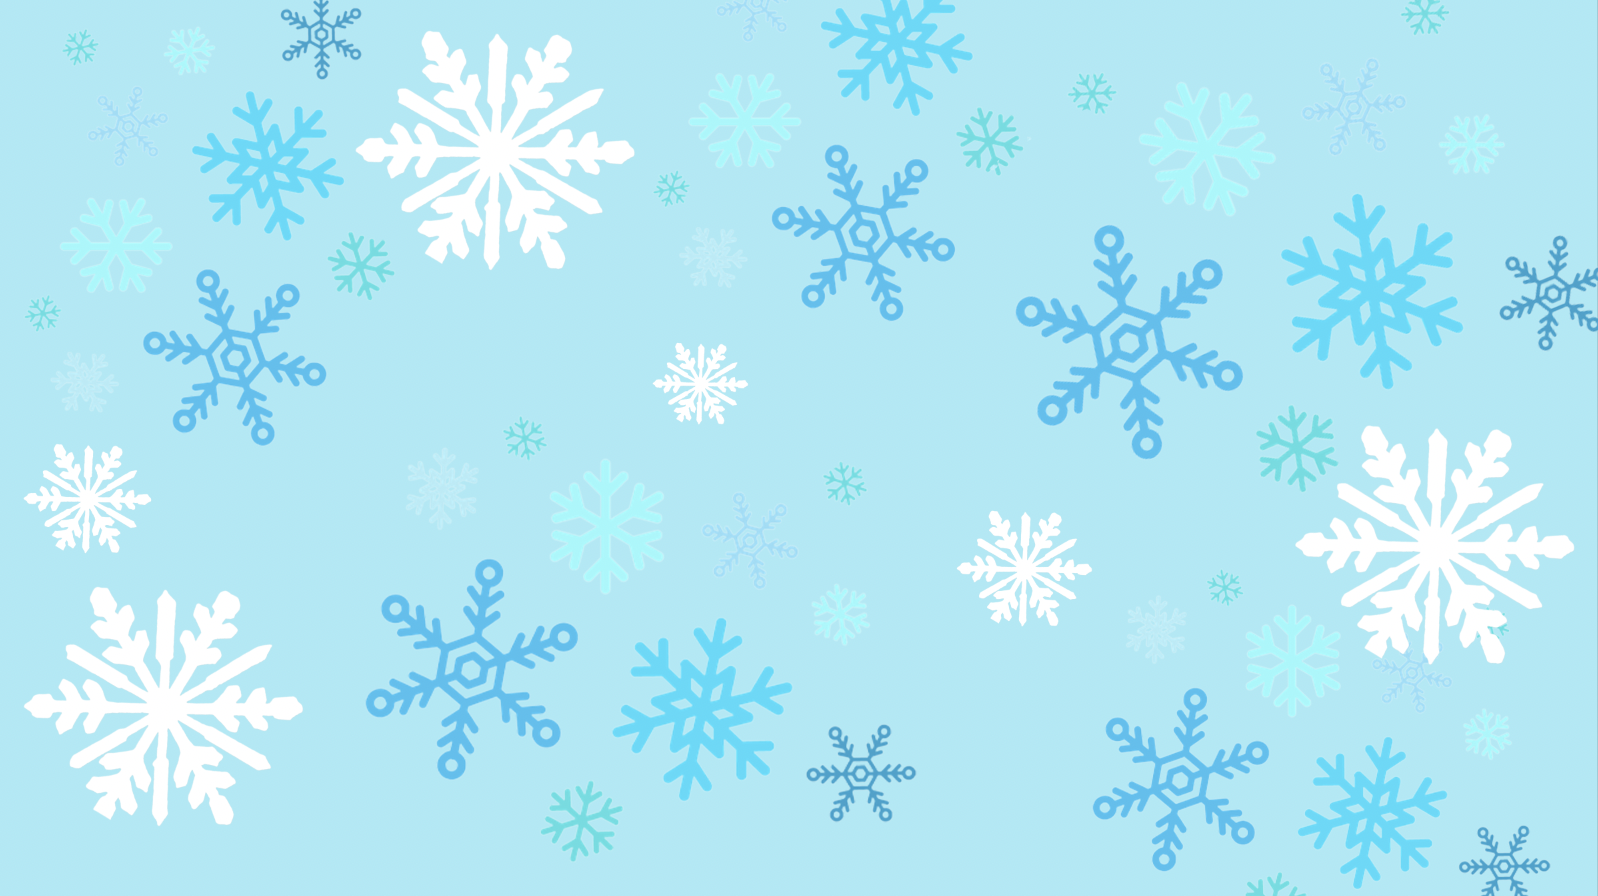 Sky blue background with snowflakes.